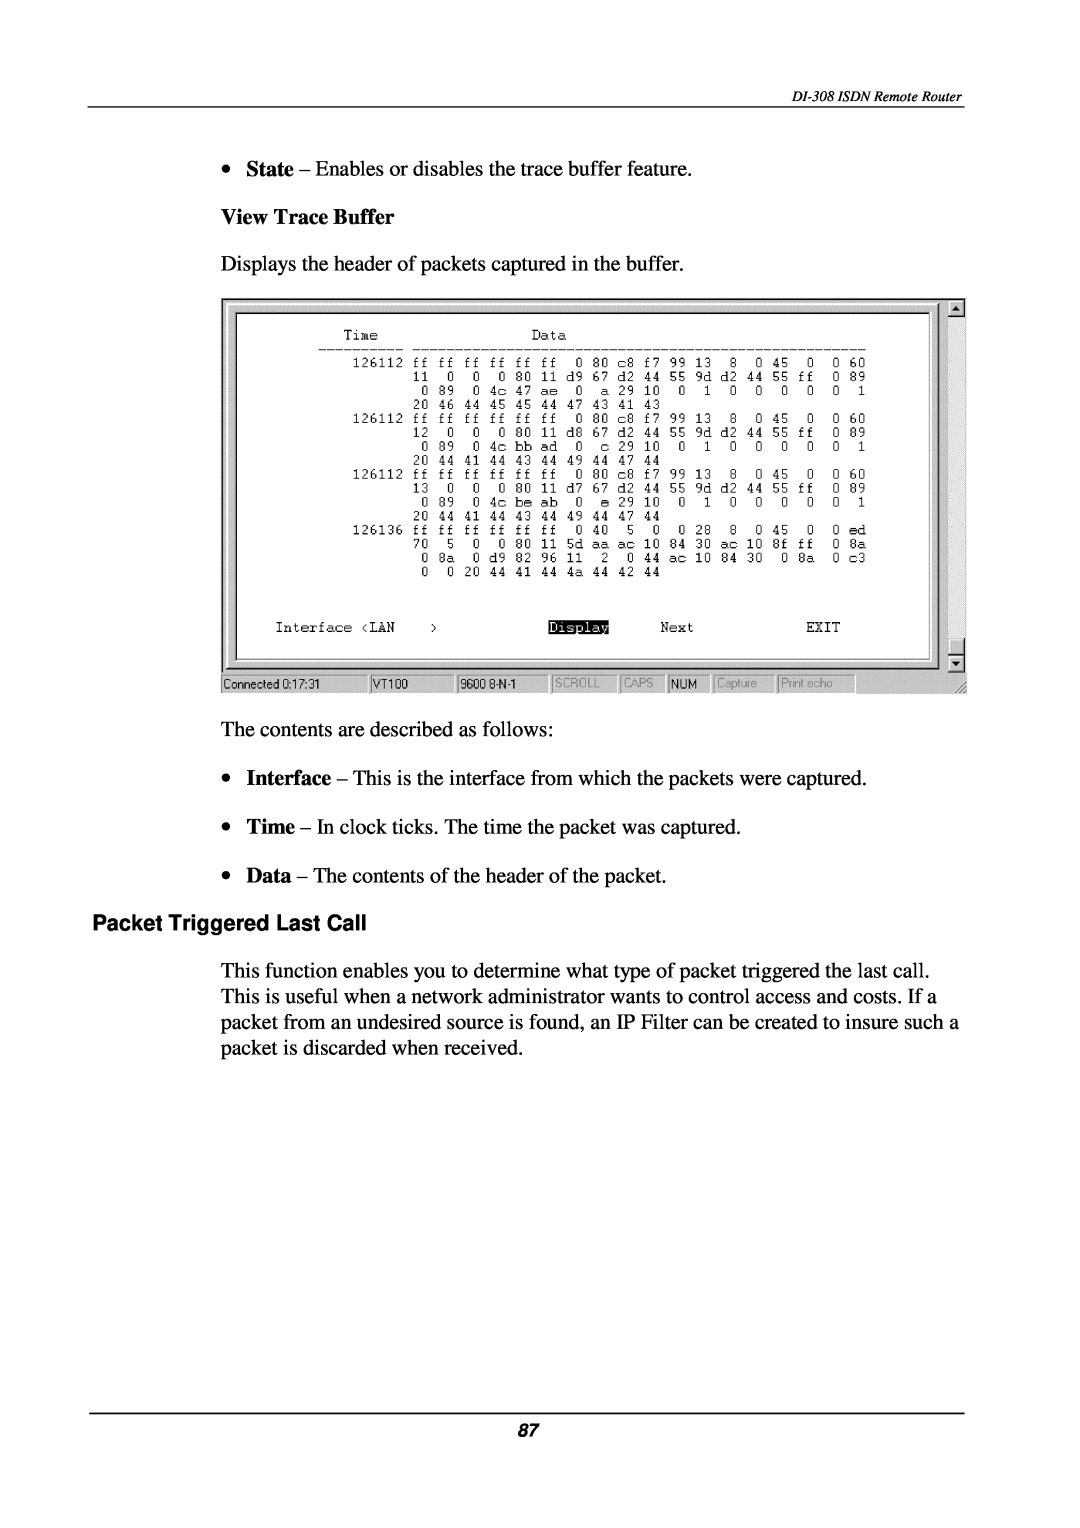 D-Link DI-308 manual View Trace Buffer, Packet Triggered Last Call 